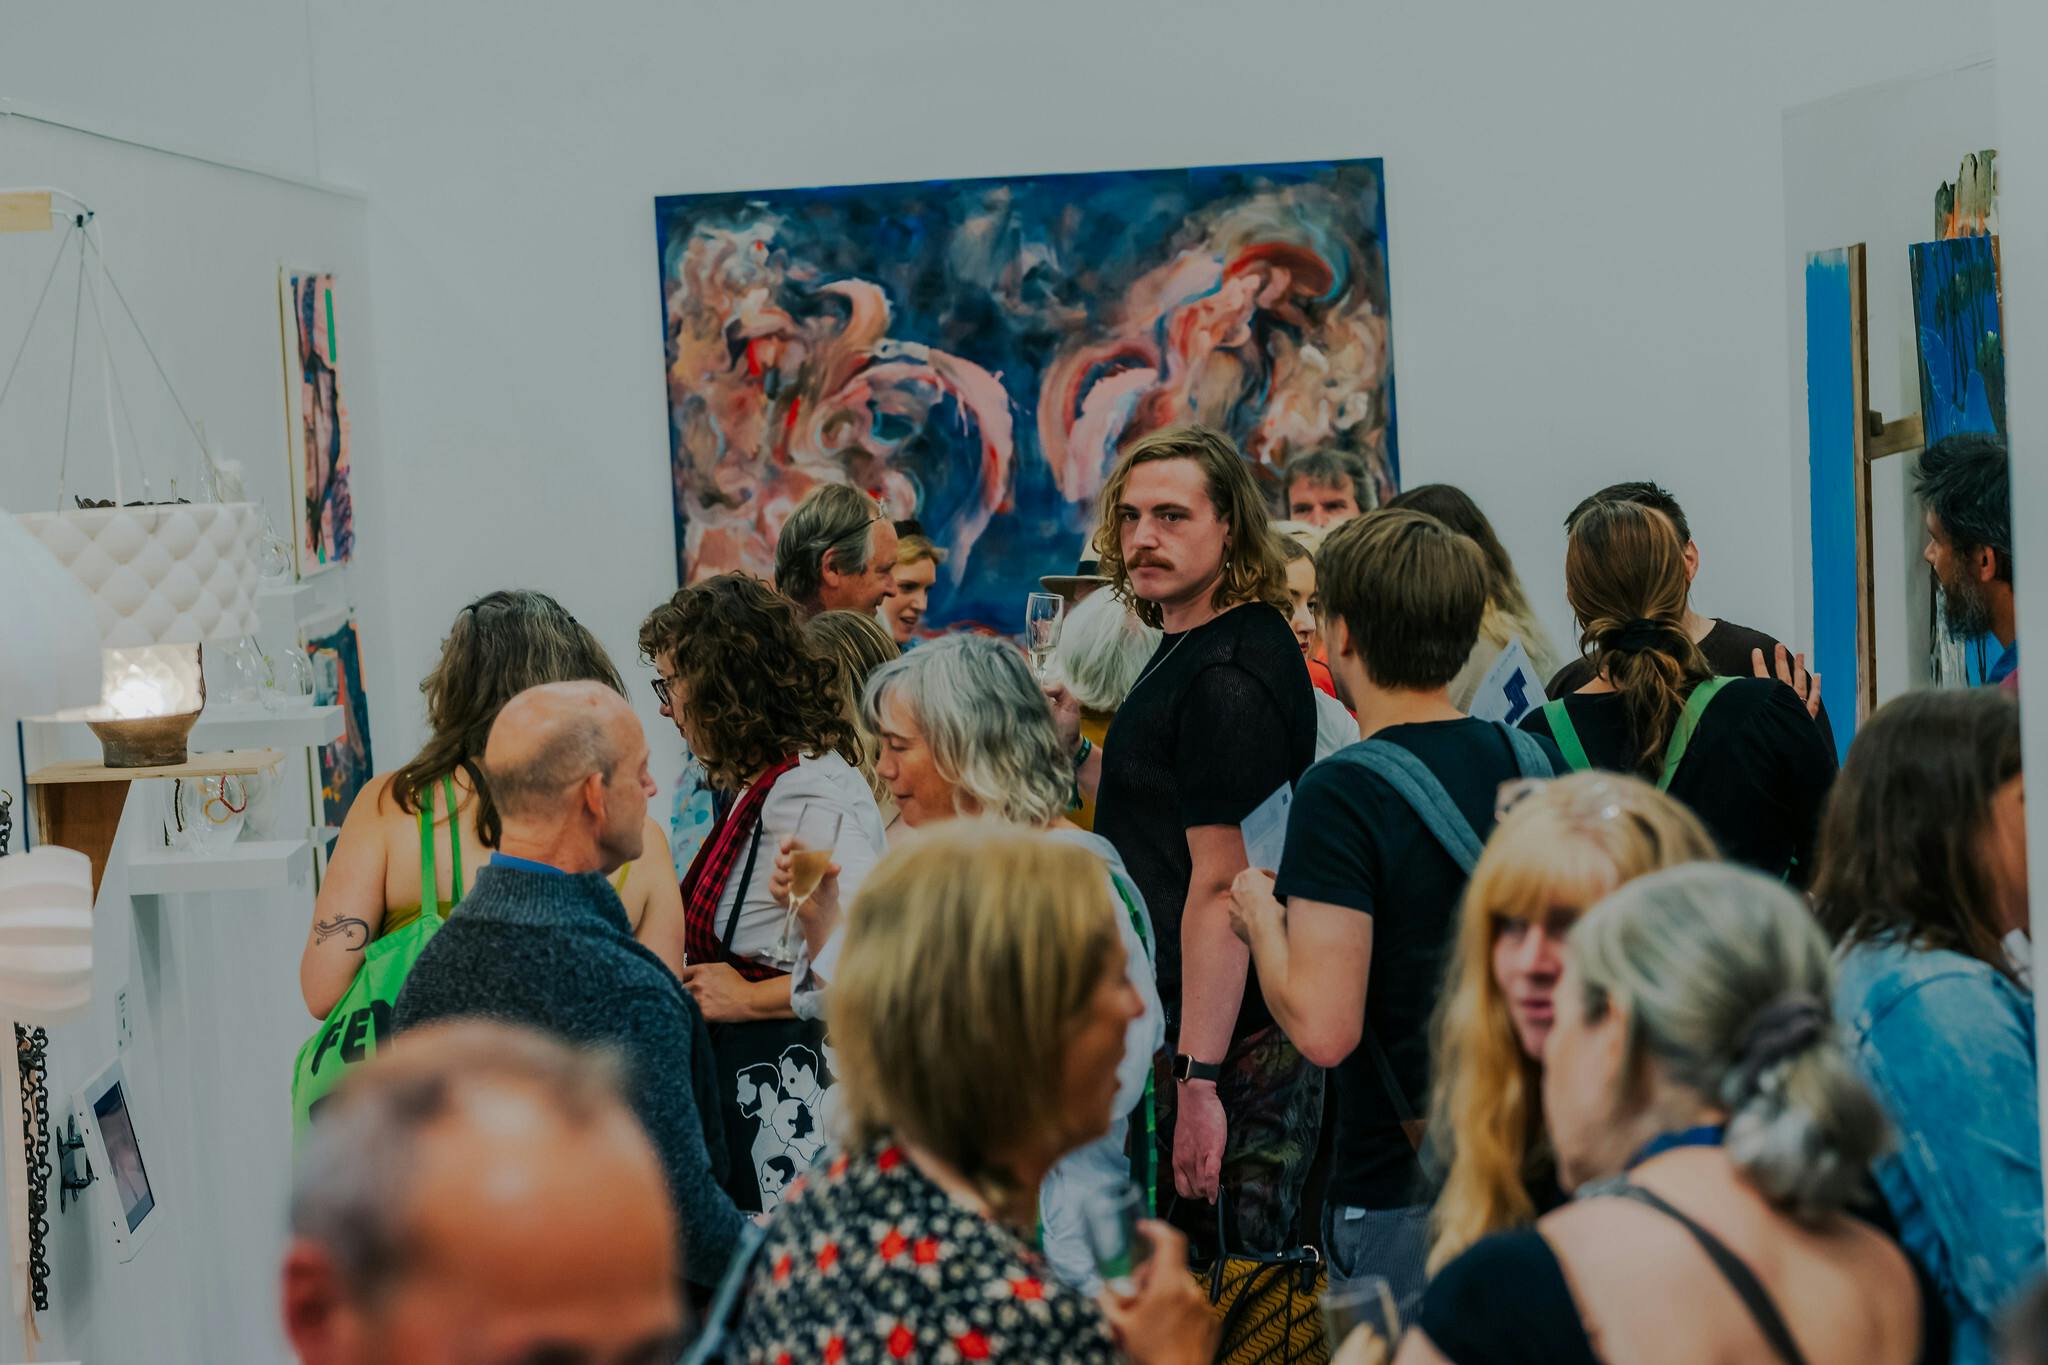 A crowd of people in an exhibition space with a large swirling painted canvas in the background and other exhibited items to the left and right